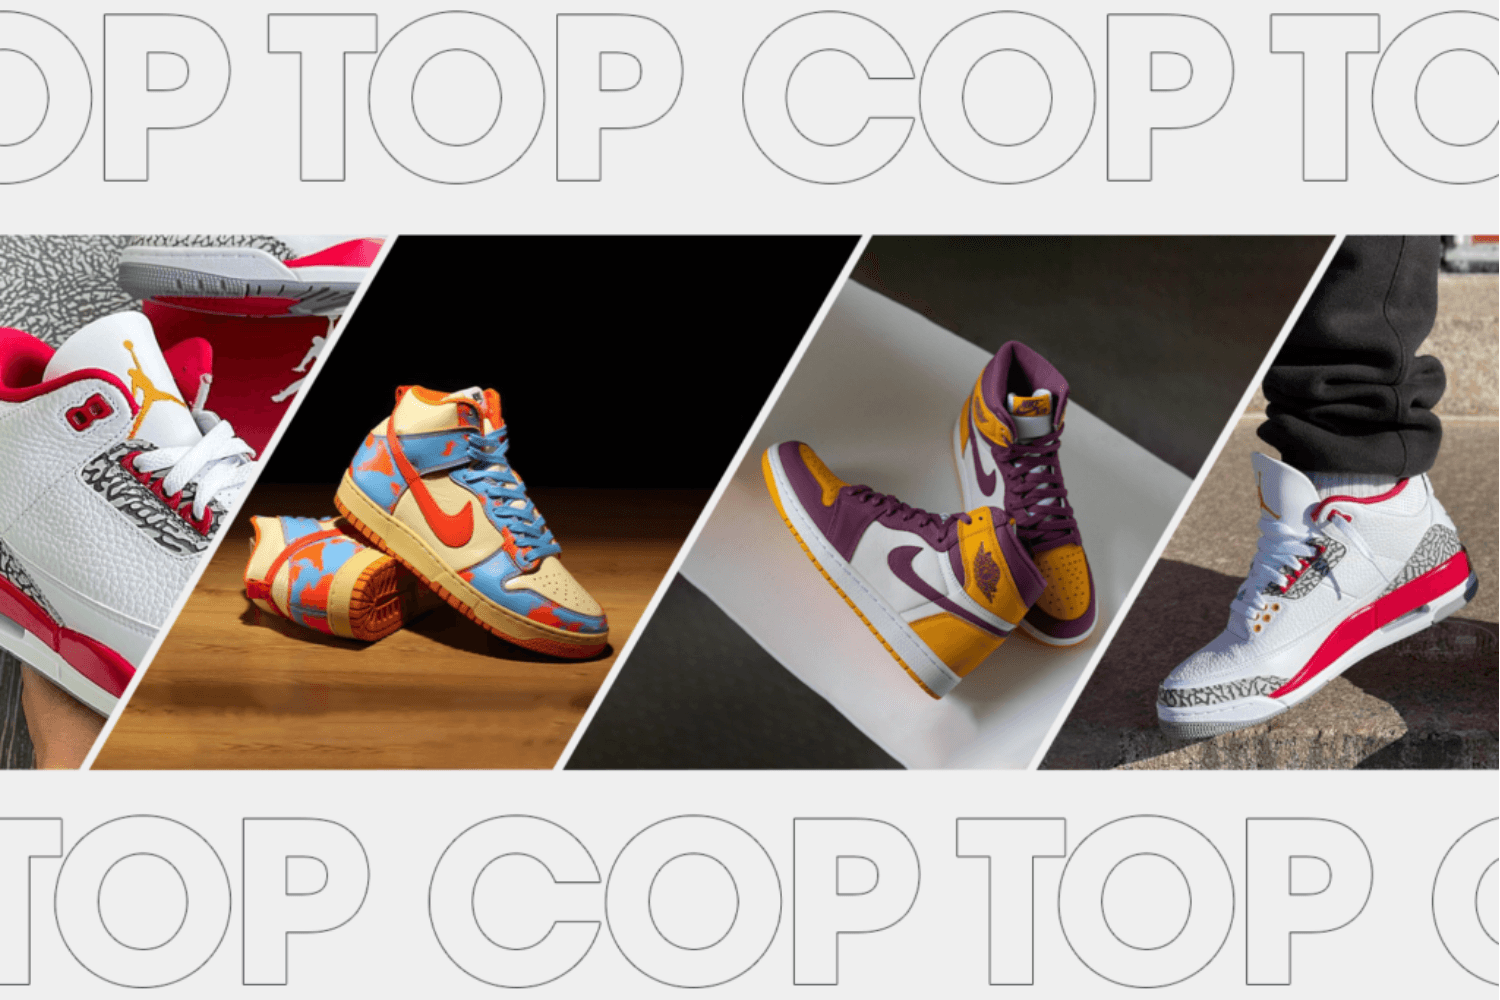 The community has voted: Your Top 3 Cop Sneaker Week 8